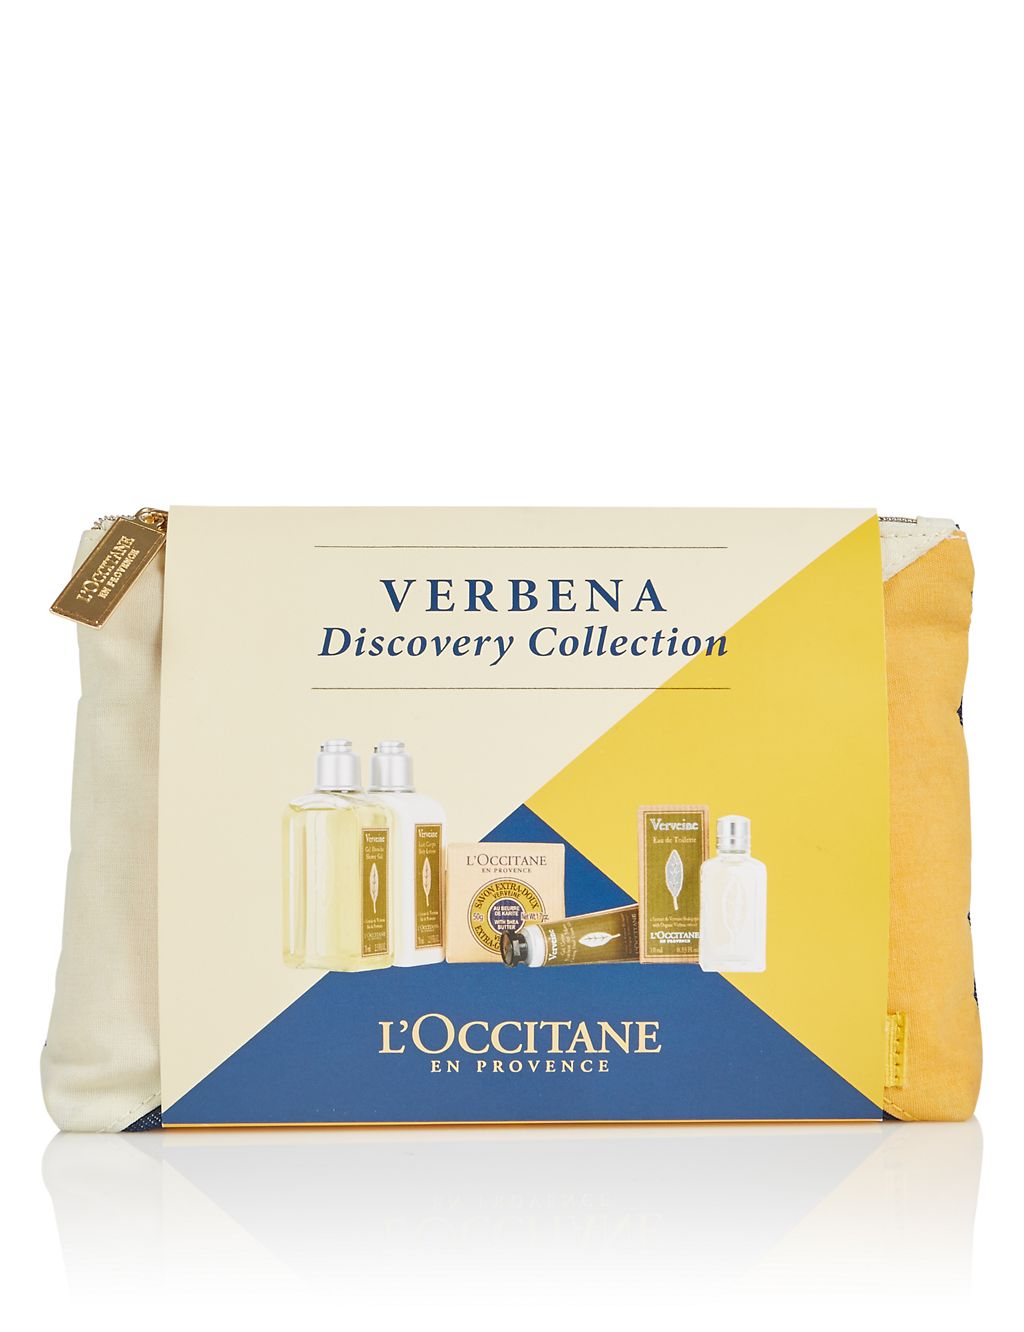 Verbena Discovery Collection 2017 2 of 3